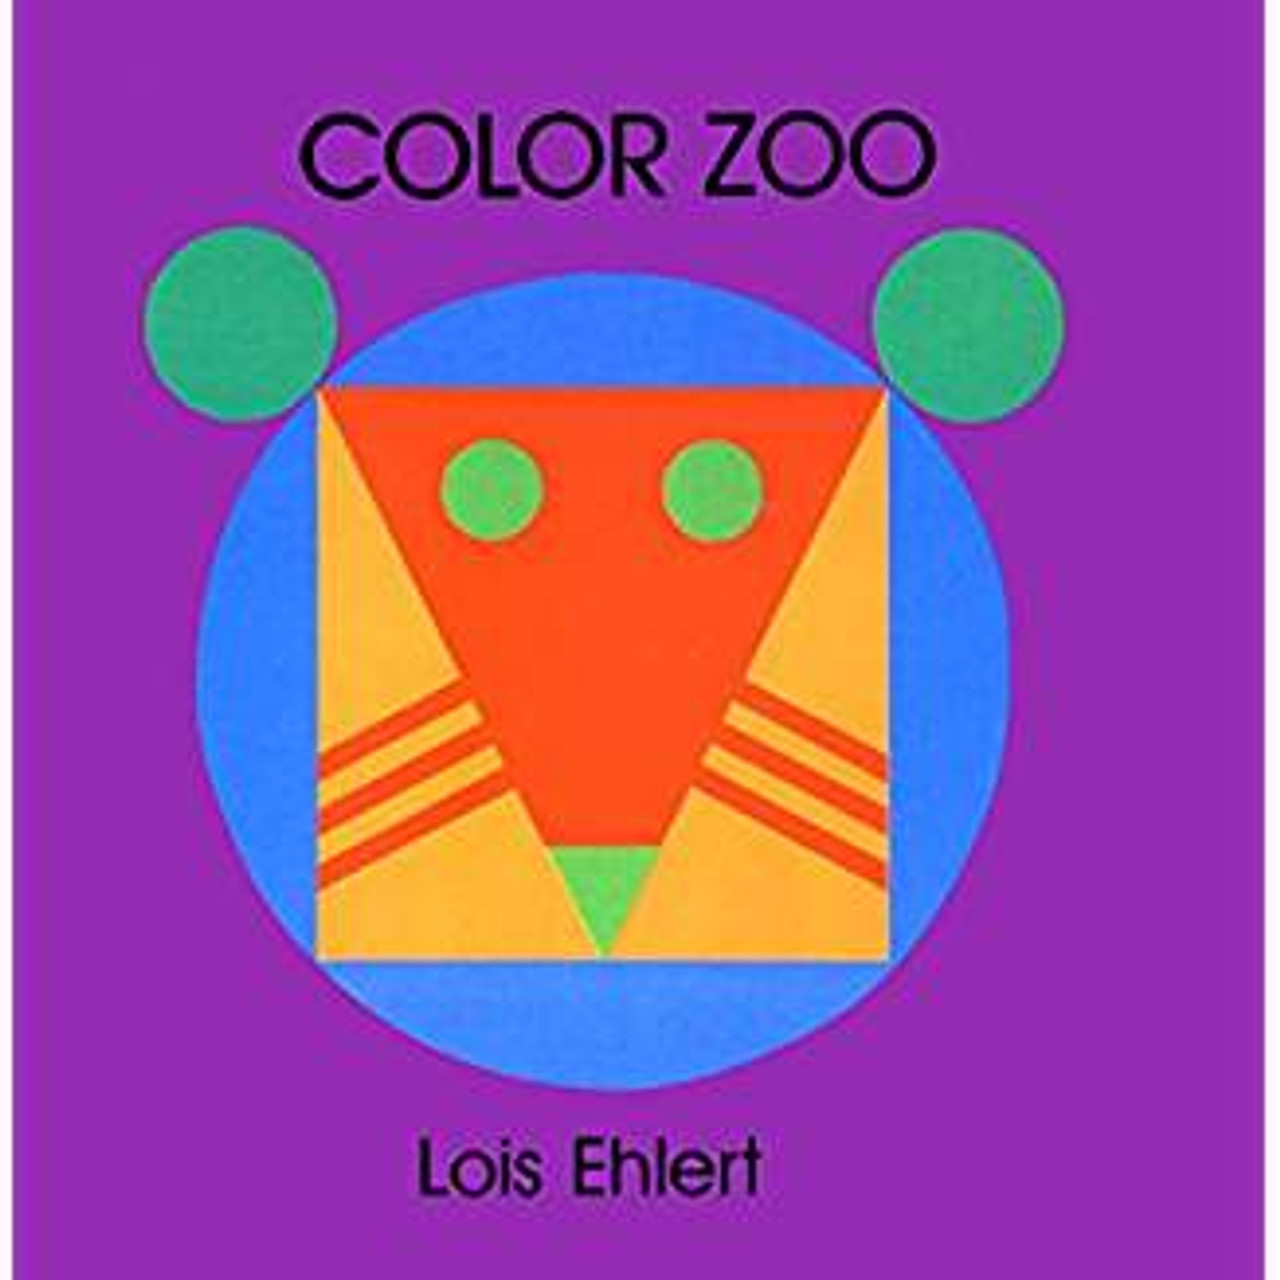 Nine animals, nine shapes, and sixteen shades of color make this glorious zoo a visual treat for little ones to explore. As readers turn each die-cut page, they can watch the pictures change--a lion turns into a goat; an ox into a monkey; a tiger into a mouse, and more. Full color.